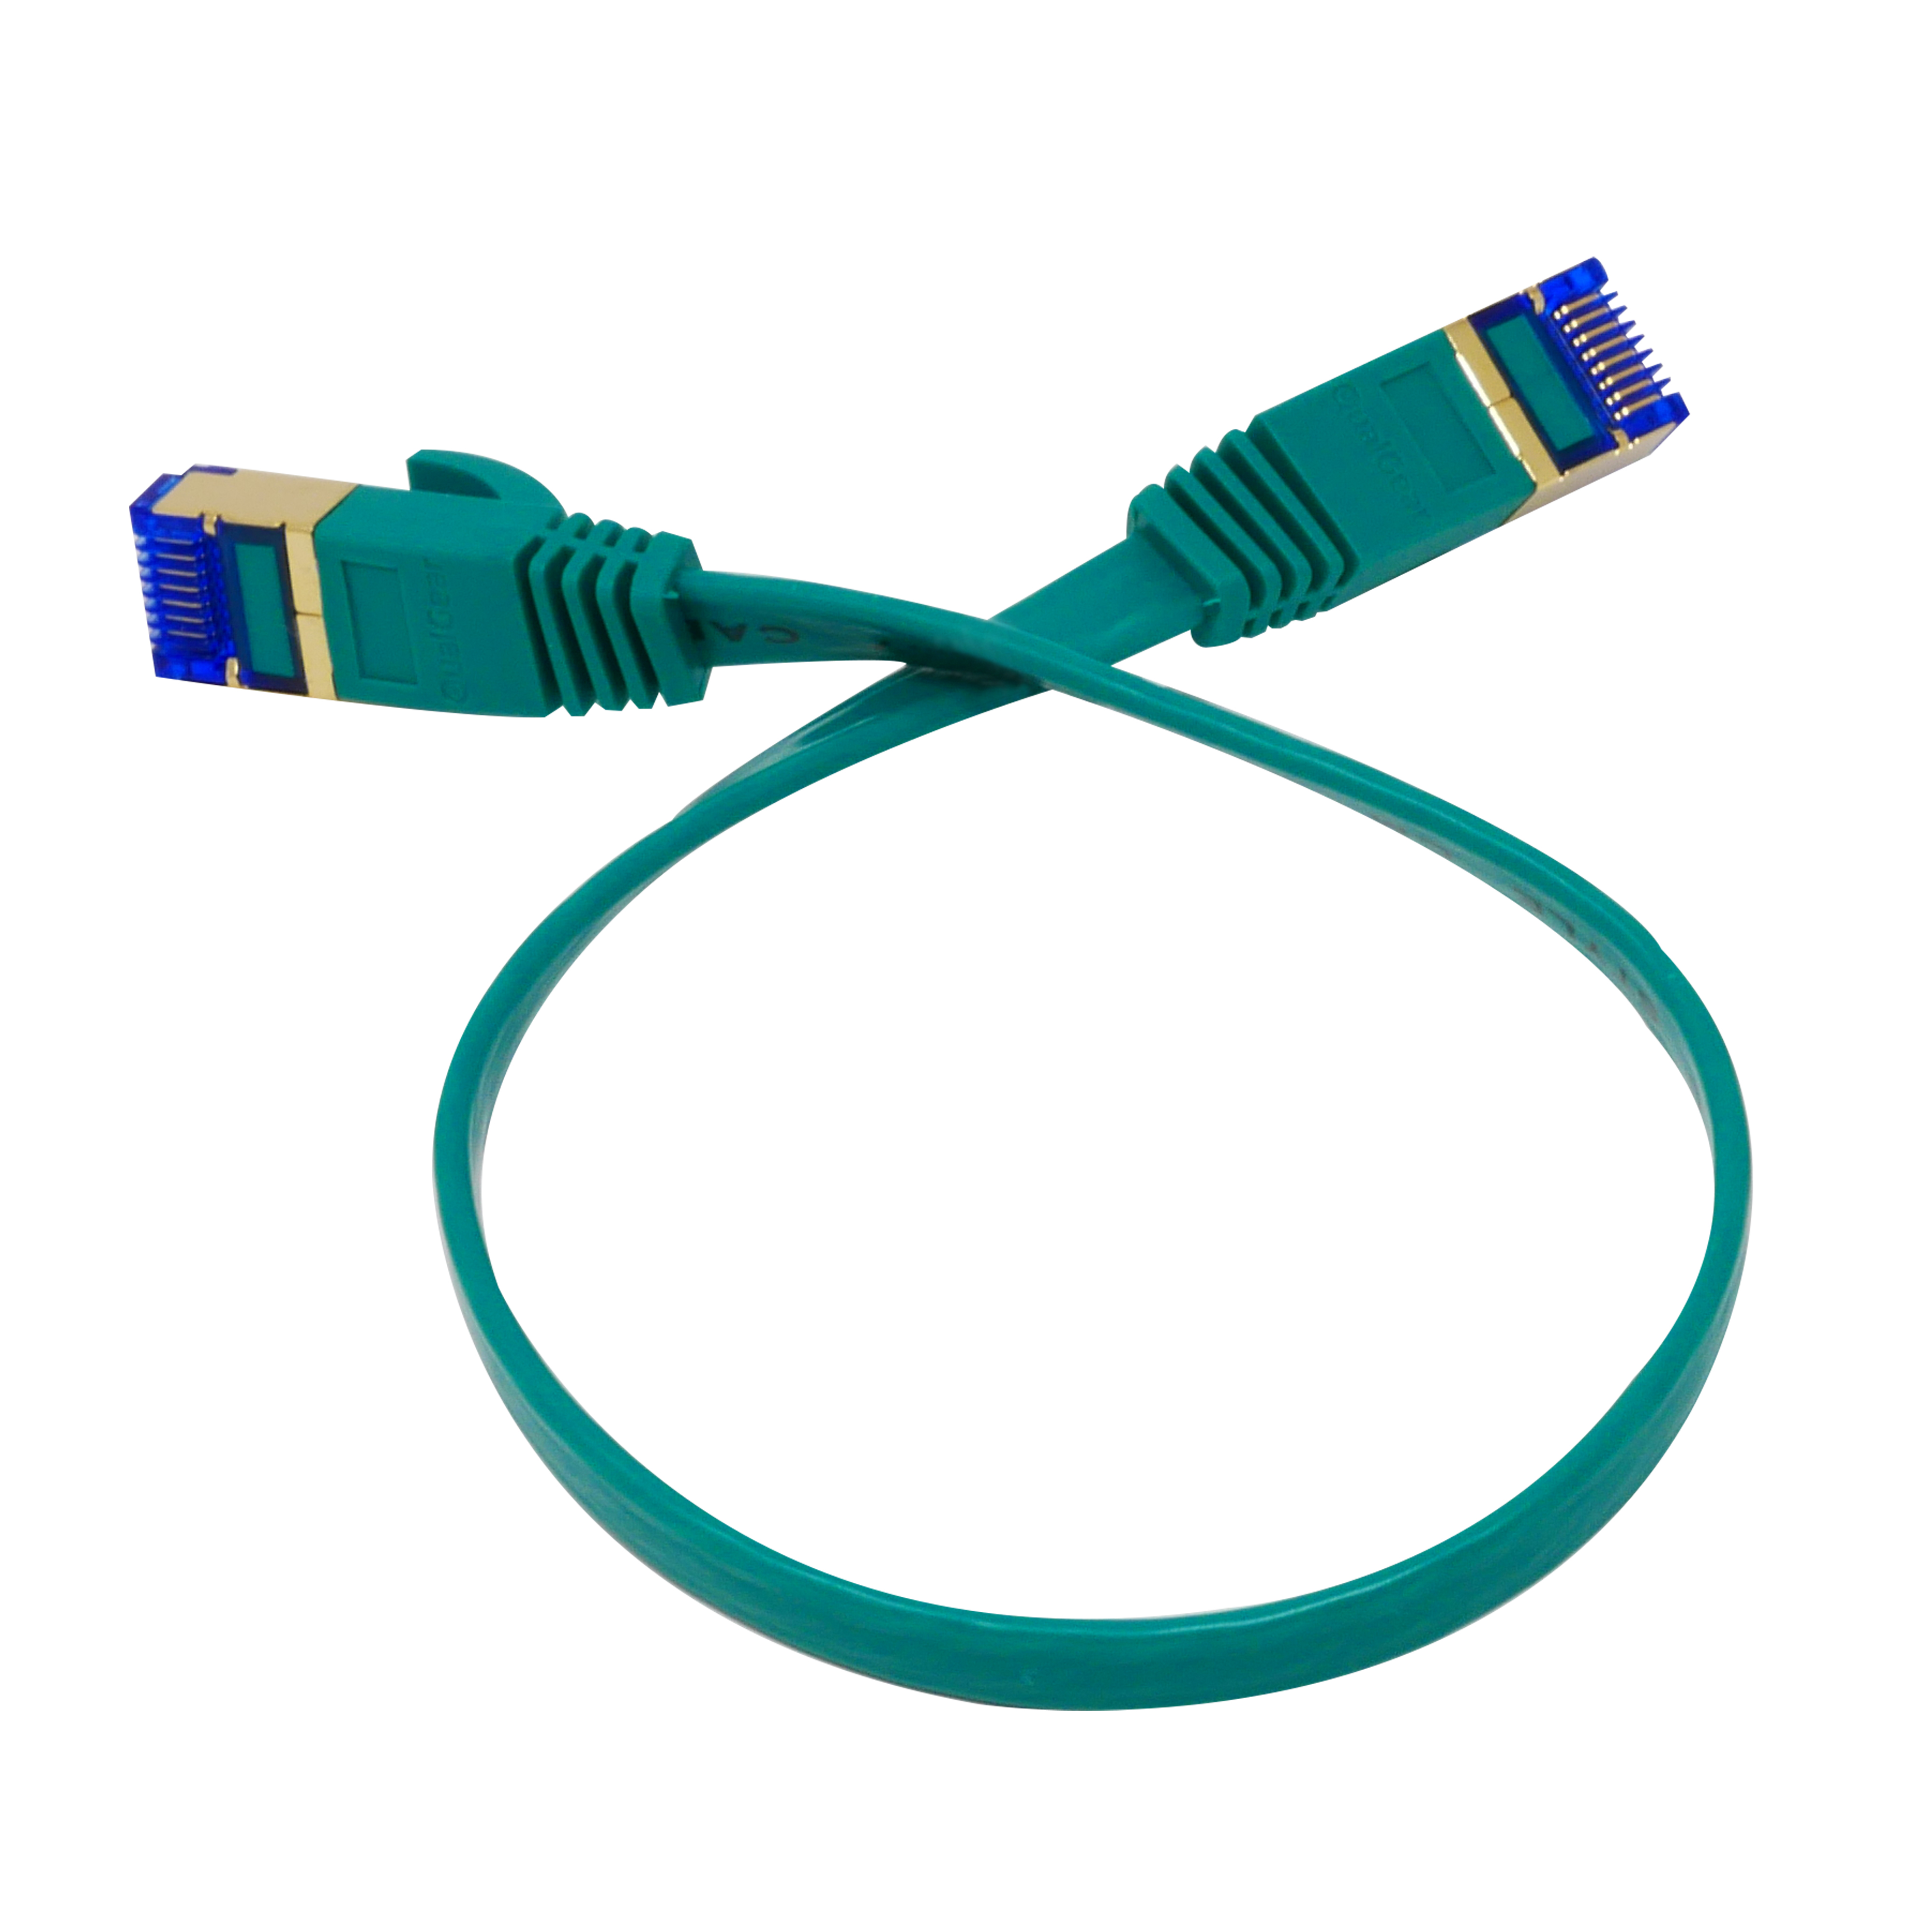 QualGear QG-CAT7F-1FT-GRN CAT 7 S/FTP Ethernet Cable Length 1 feet - 26 AWG, 10 Gbps, Gold Plated Contacts, RJ45, 99.99% OFC Copper, Color Green 